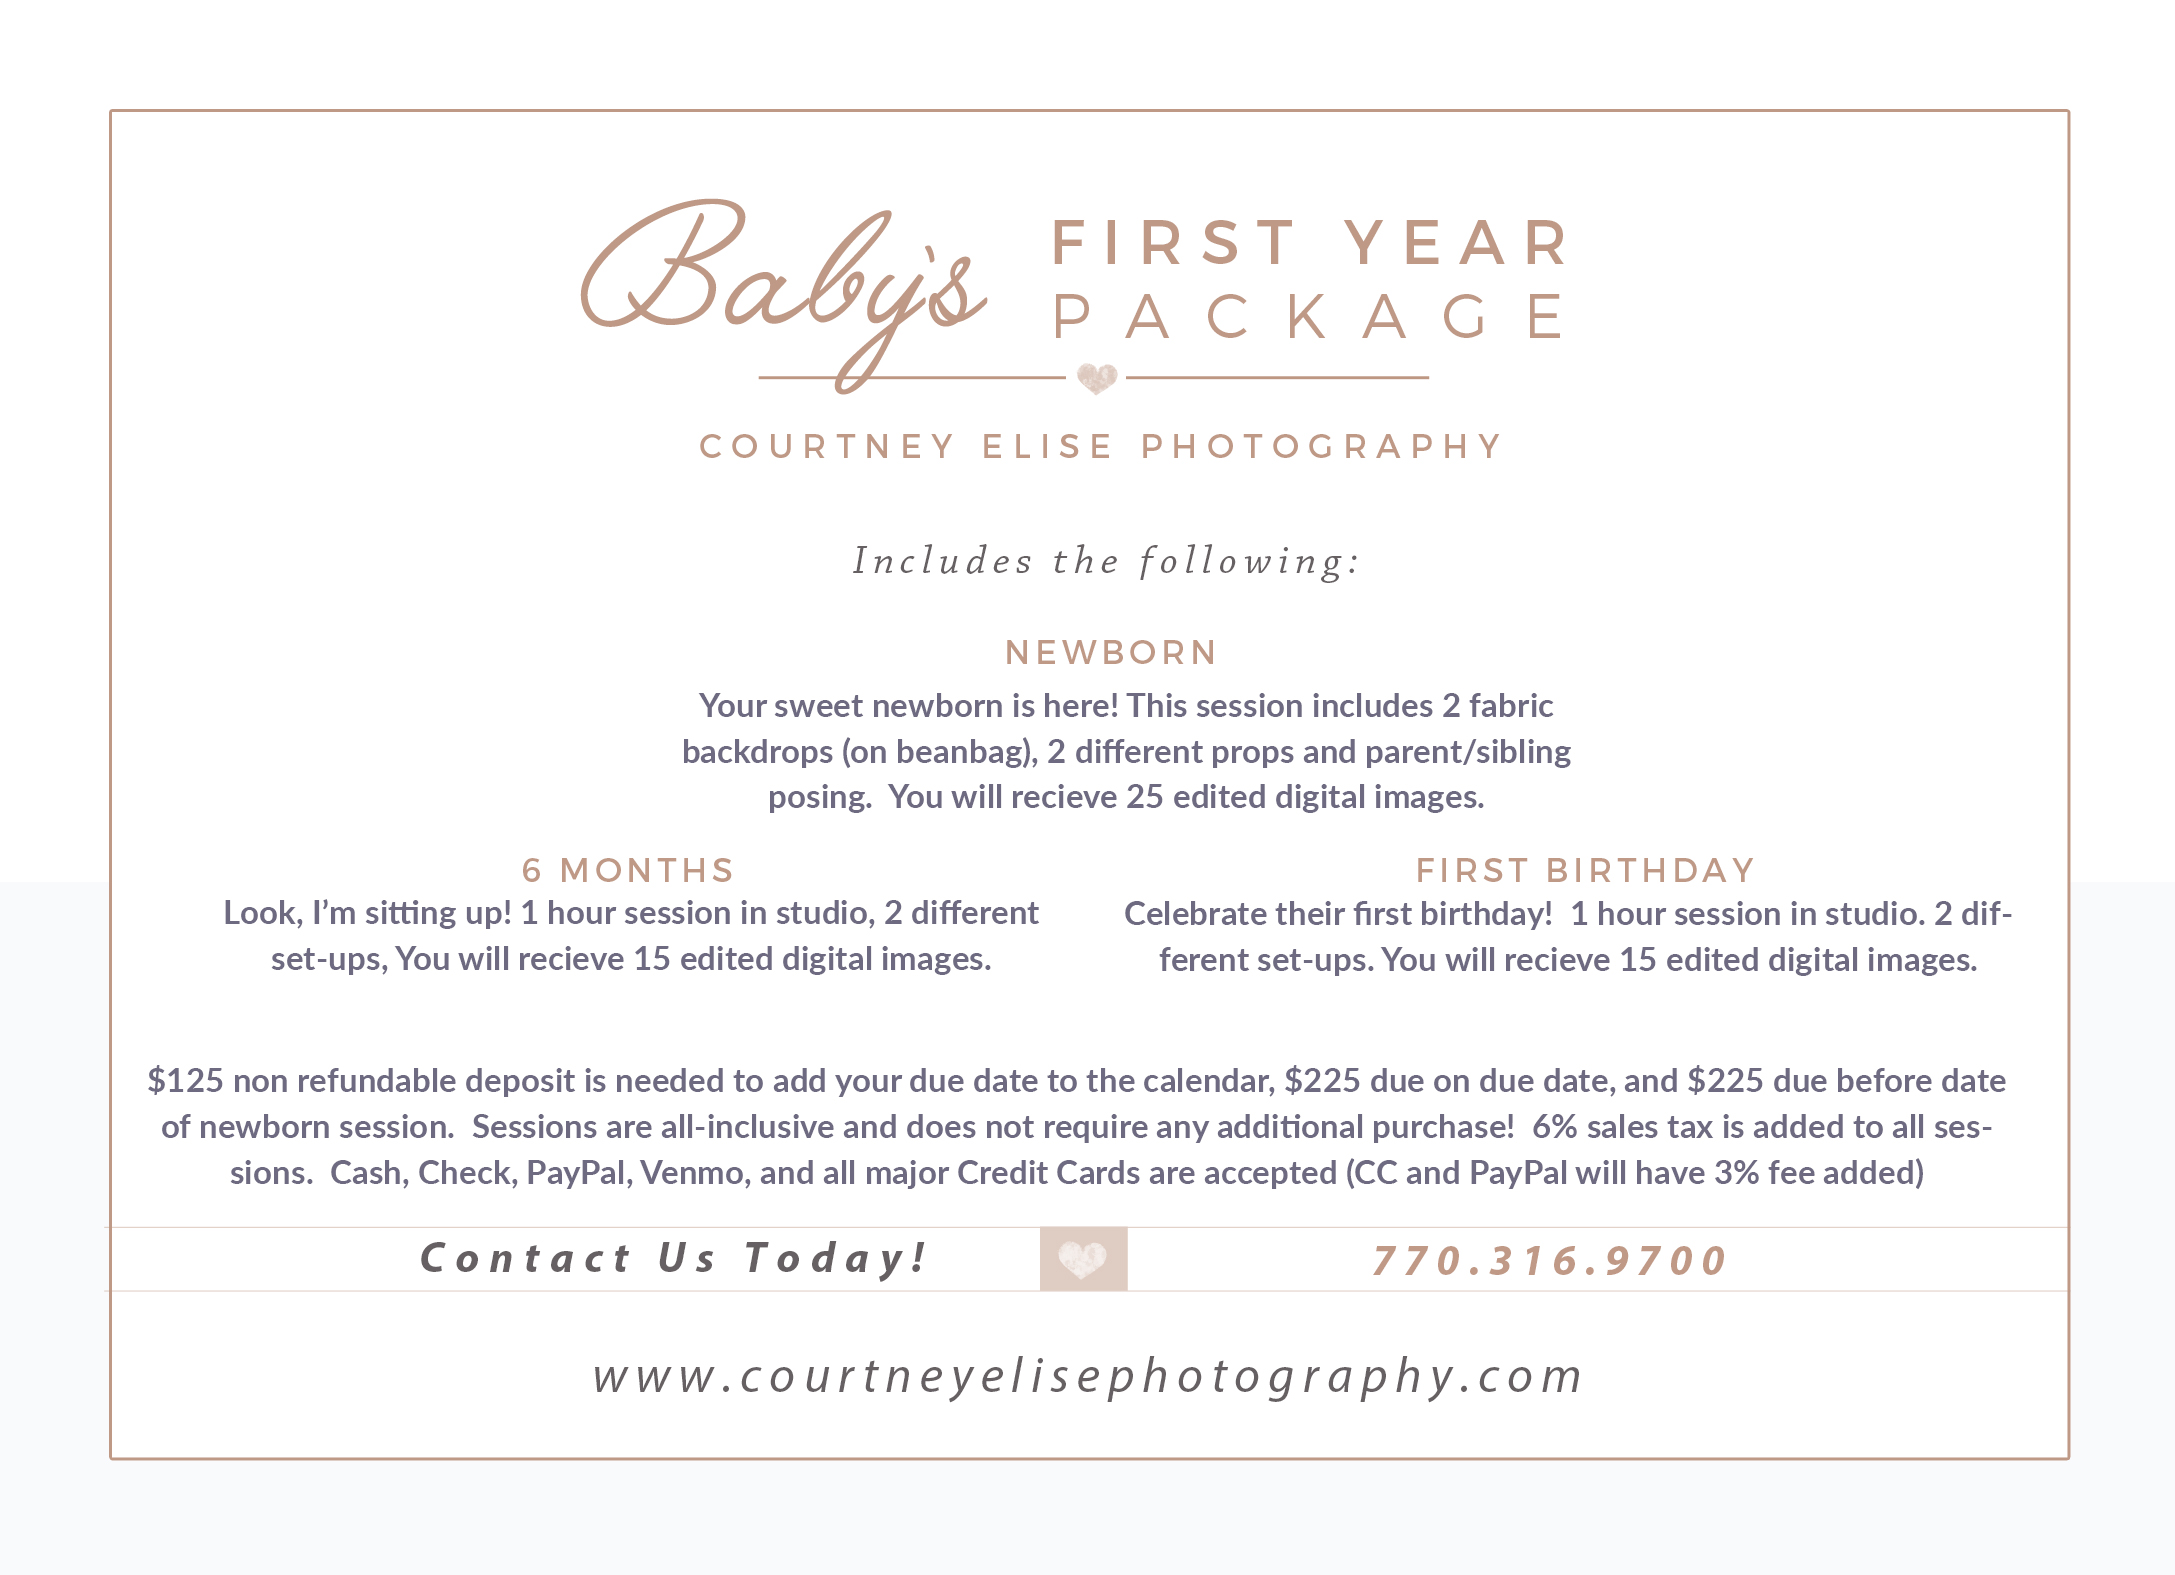 Pricing-Courtney-Elise-Photography-First-Year-Package